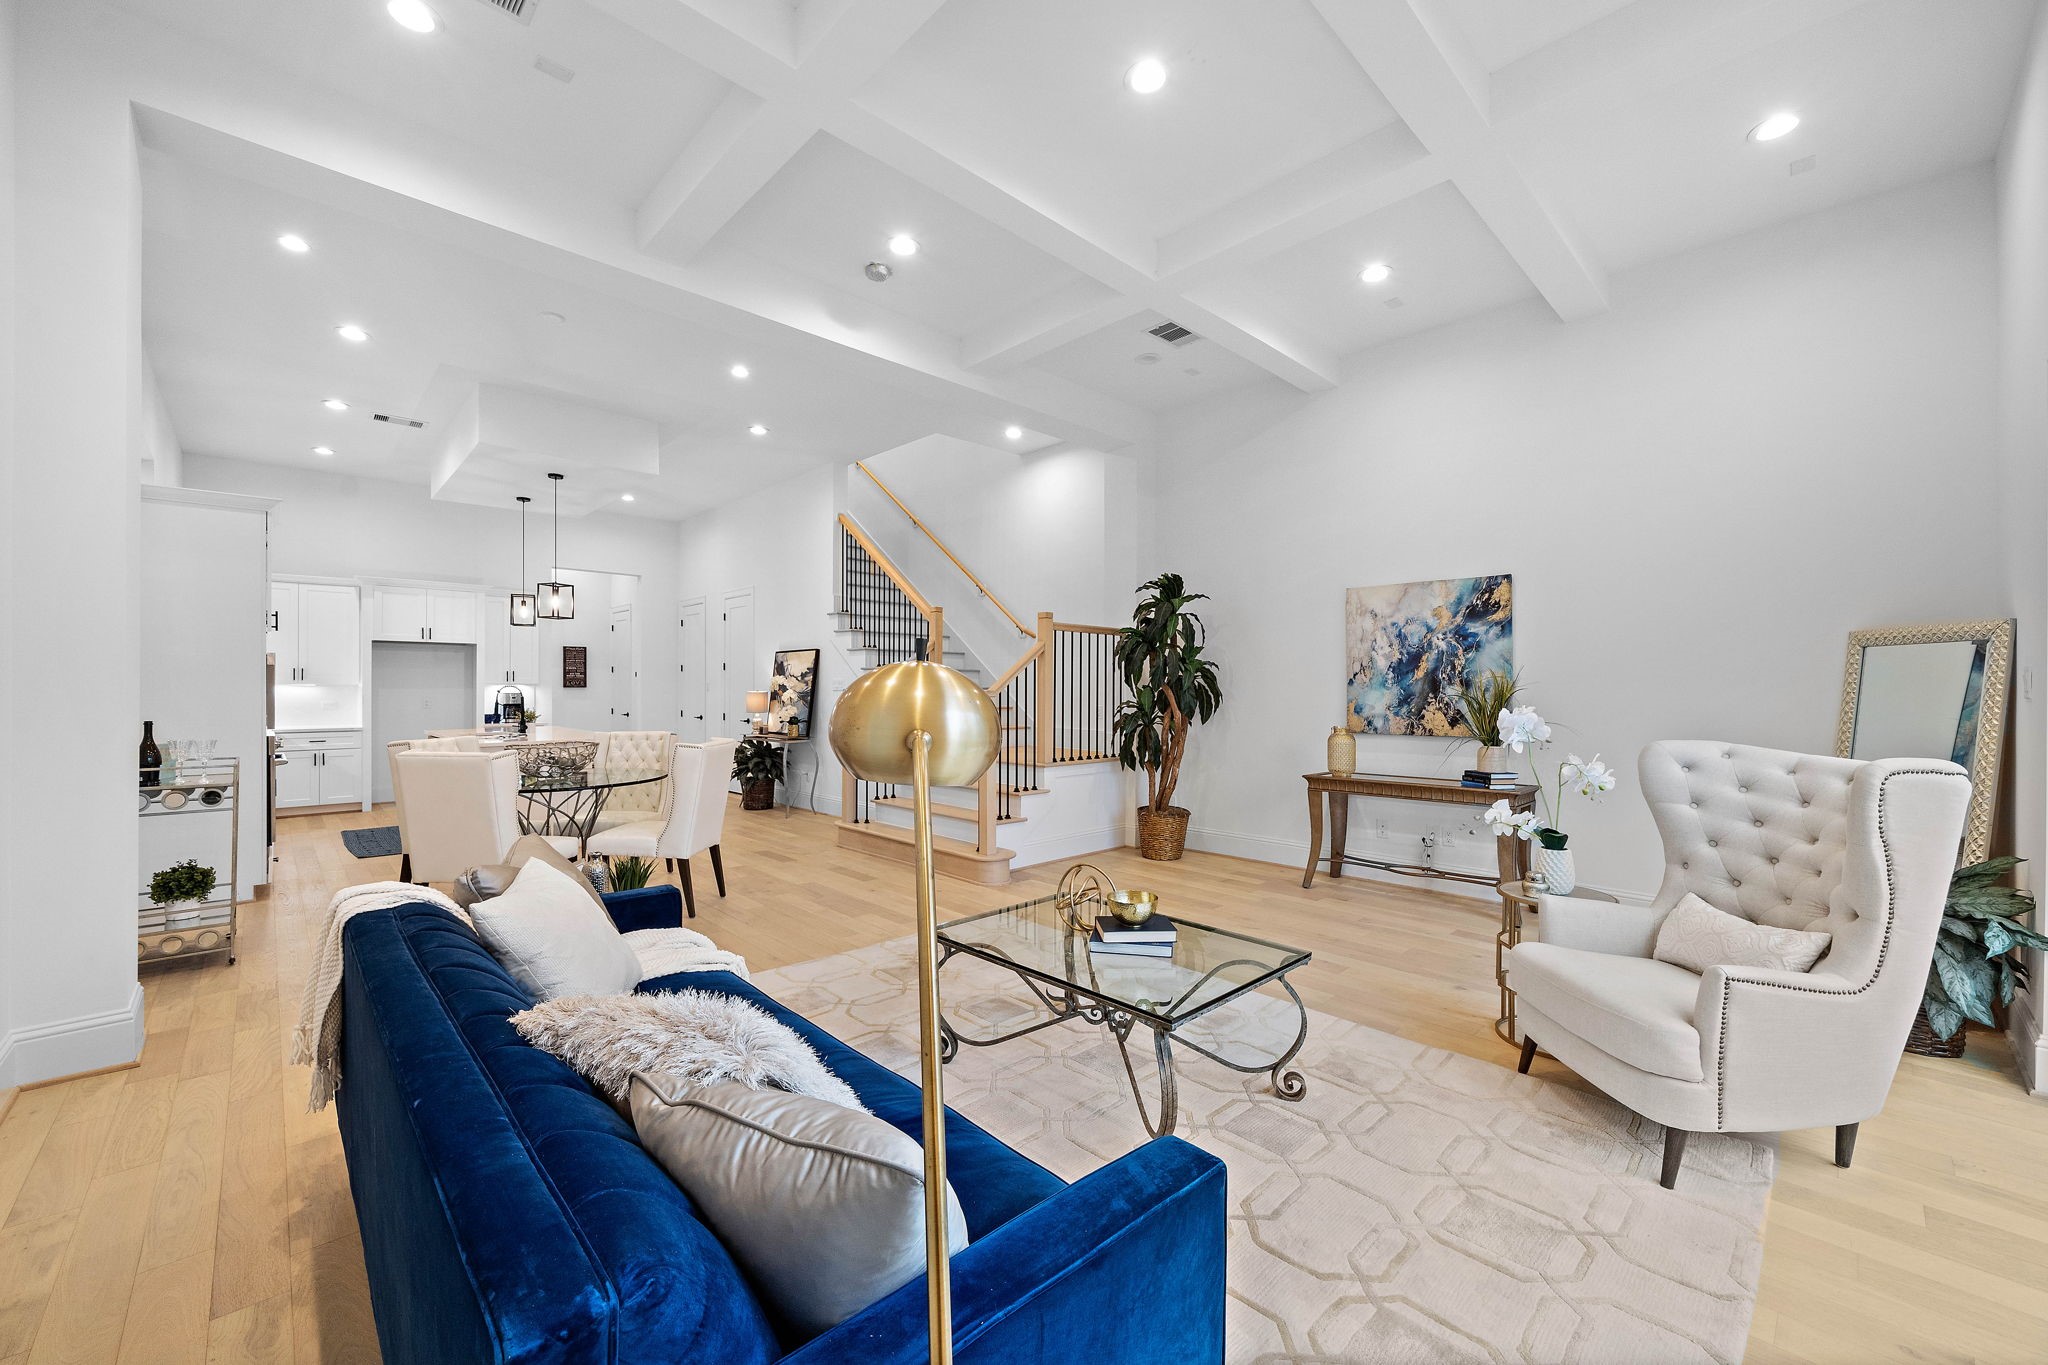 Spacious light and bright living with beamed ceiling, wide plank wood flooring, and wood stairway with wrought iron railing. (Photo is of a completed home, finishes are subject to change.)